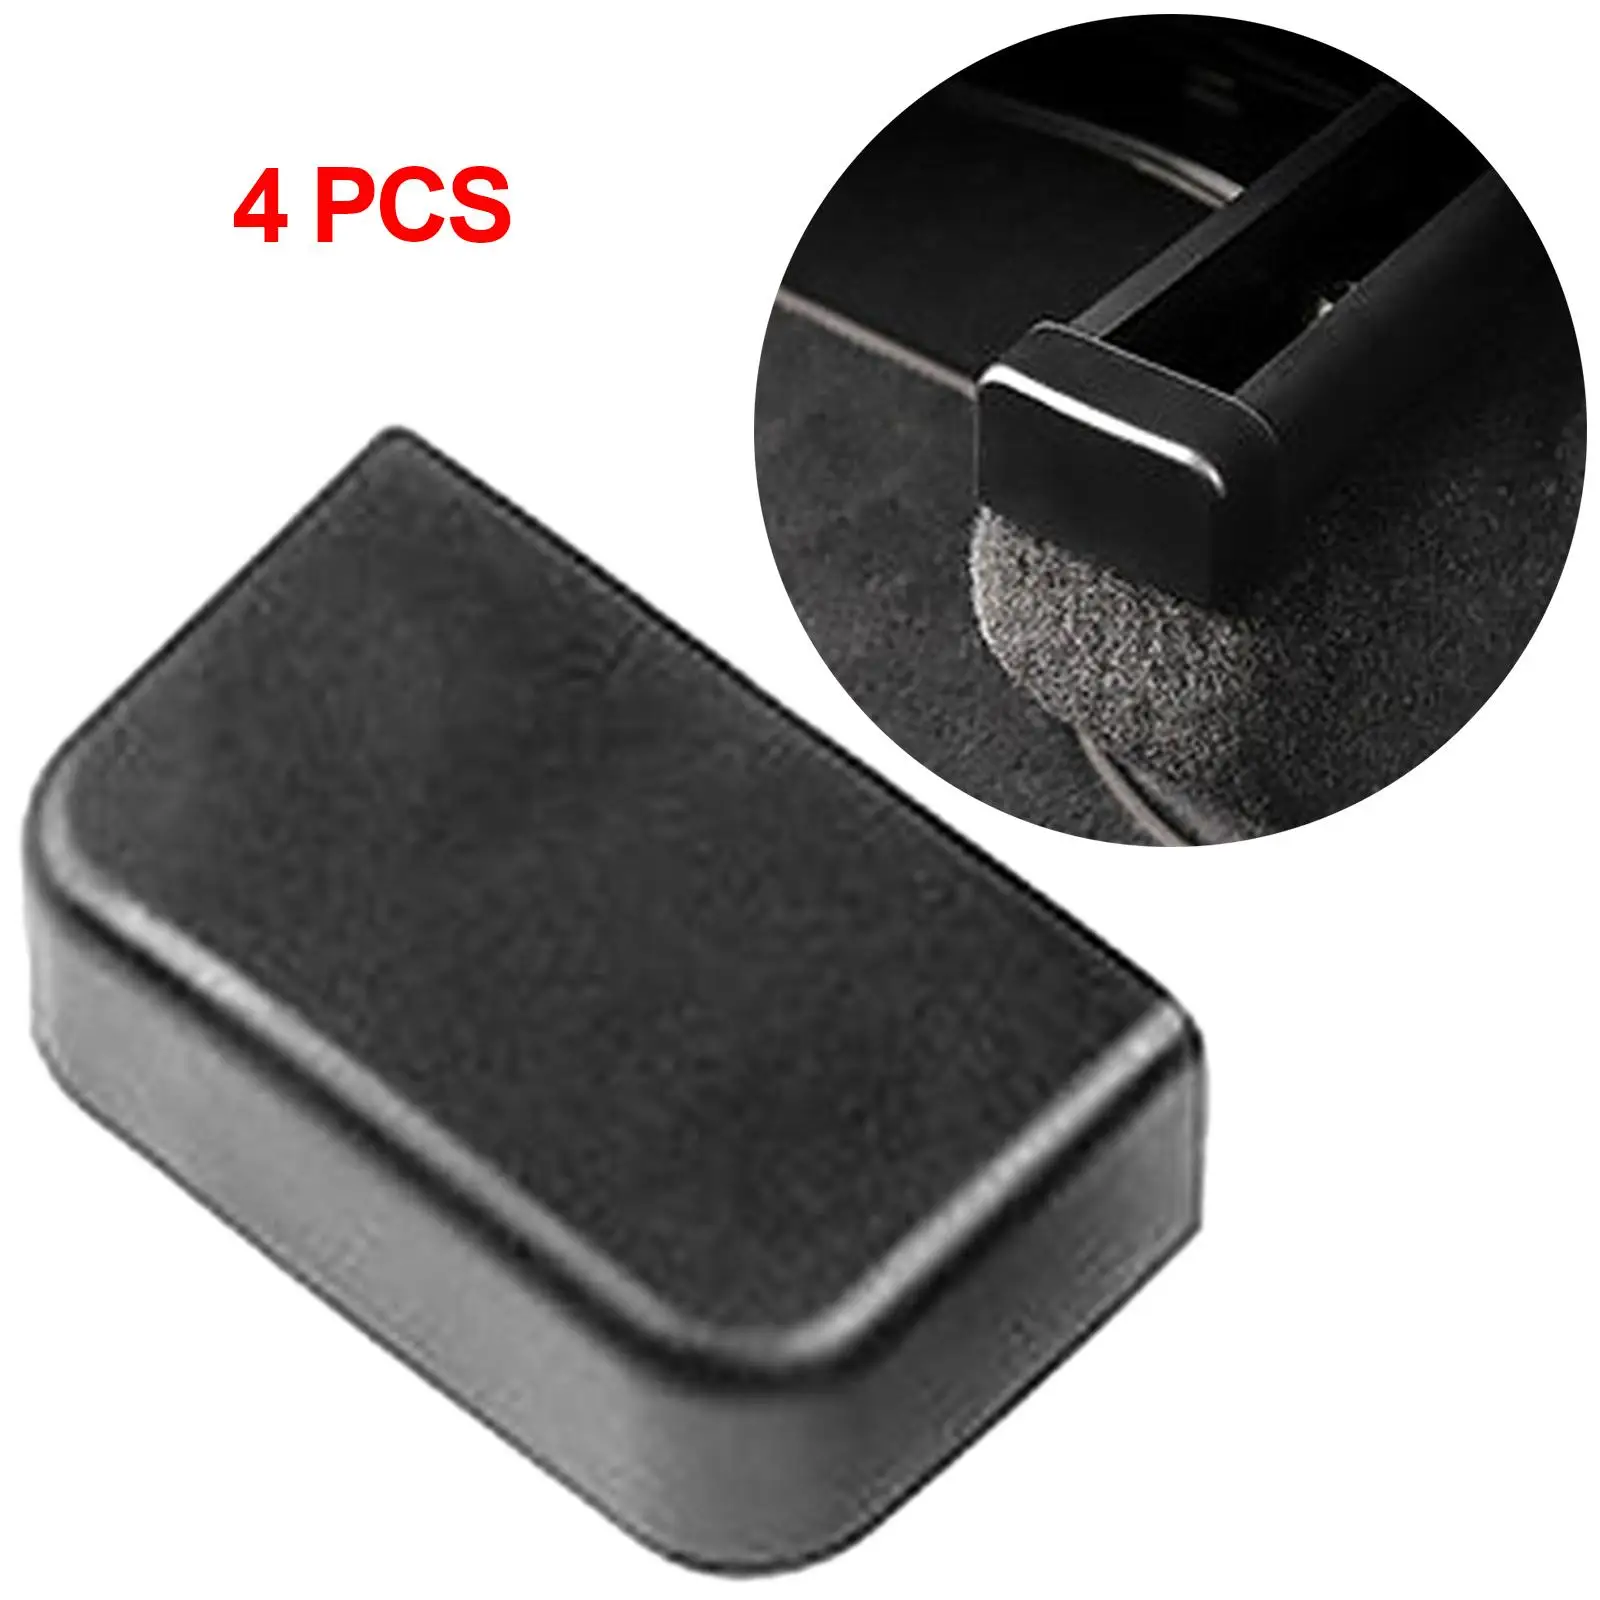 4 Pieces Rear Seat Scratch-Resistance Functional ABS Plastic Accessories Slide Rail Plugs Anti-Kick Fit for Tesla Model 3/Y